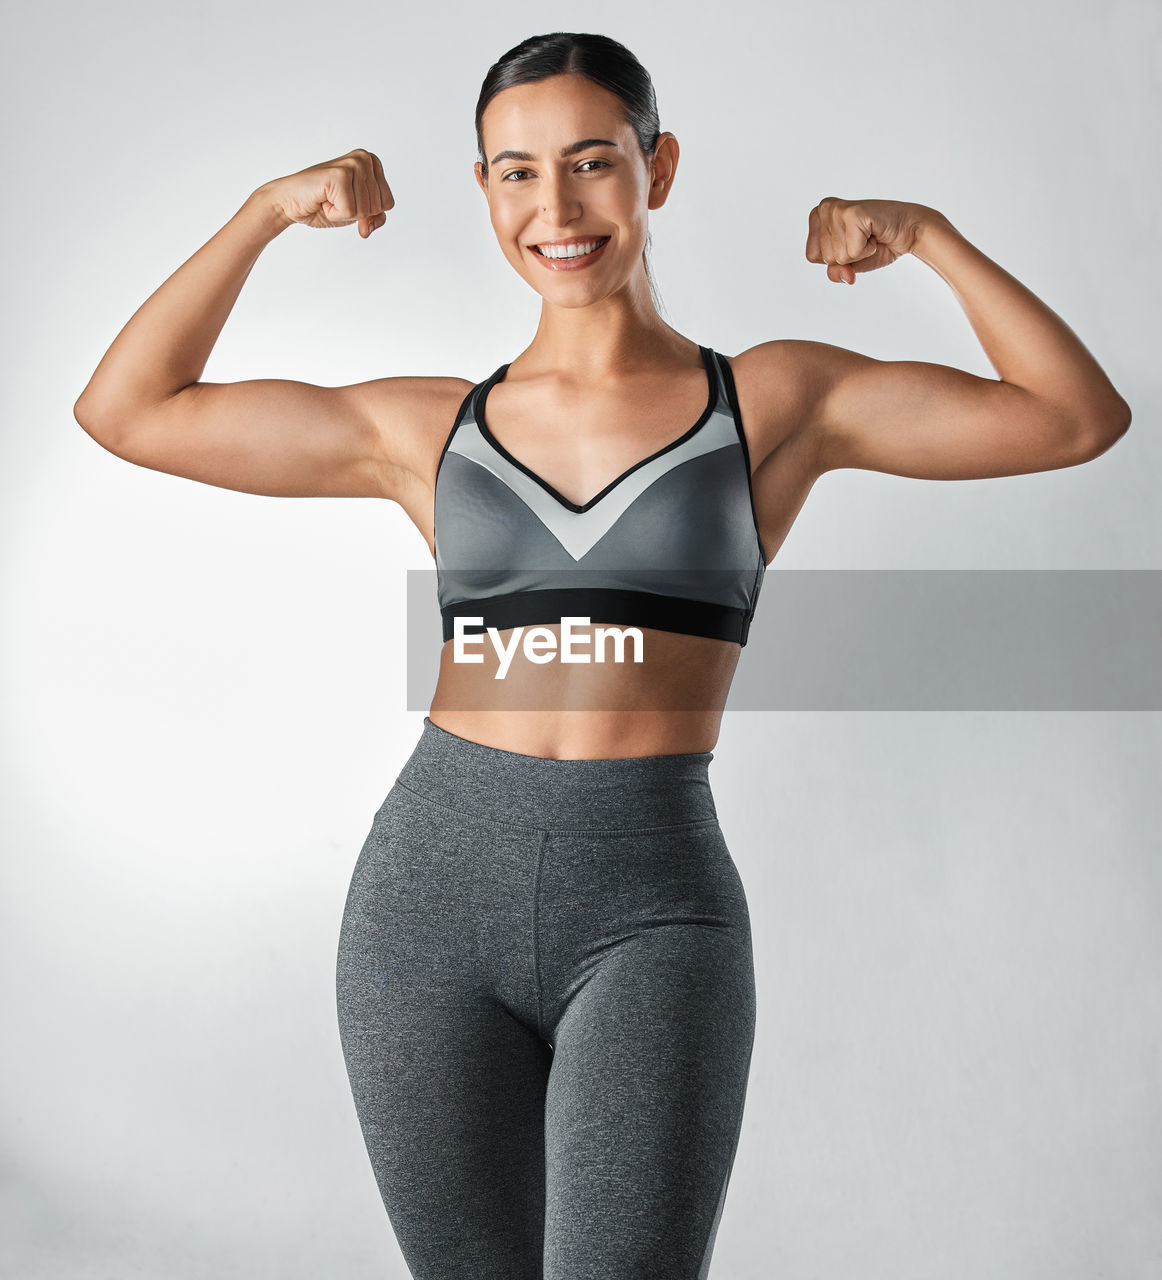 arm, women, one person, adult, exercising, portrait, lifestyles, studio shot, wellbeing, indoors, young adult, muscular build, limb, sports clothing, trunk, looking at camera, sports, vitality, undergarment, athlete, standing, smiling, strength, flexing muscles, clothing, human leg, female, sports training, happiness, gray, body conscious, physical fitness, bodybuilding, emotion, human muscle, human limb, person, front view, relaxation, gray background, cheerful, body care, slim, photo shoot, brown hair, arms raised, weight, brassiere, fitness professional, positive emotion, cut out, trousers, white background, sports bra, tank top, ponytail, enjoyment, hand